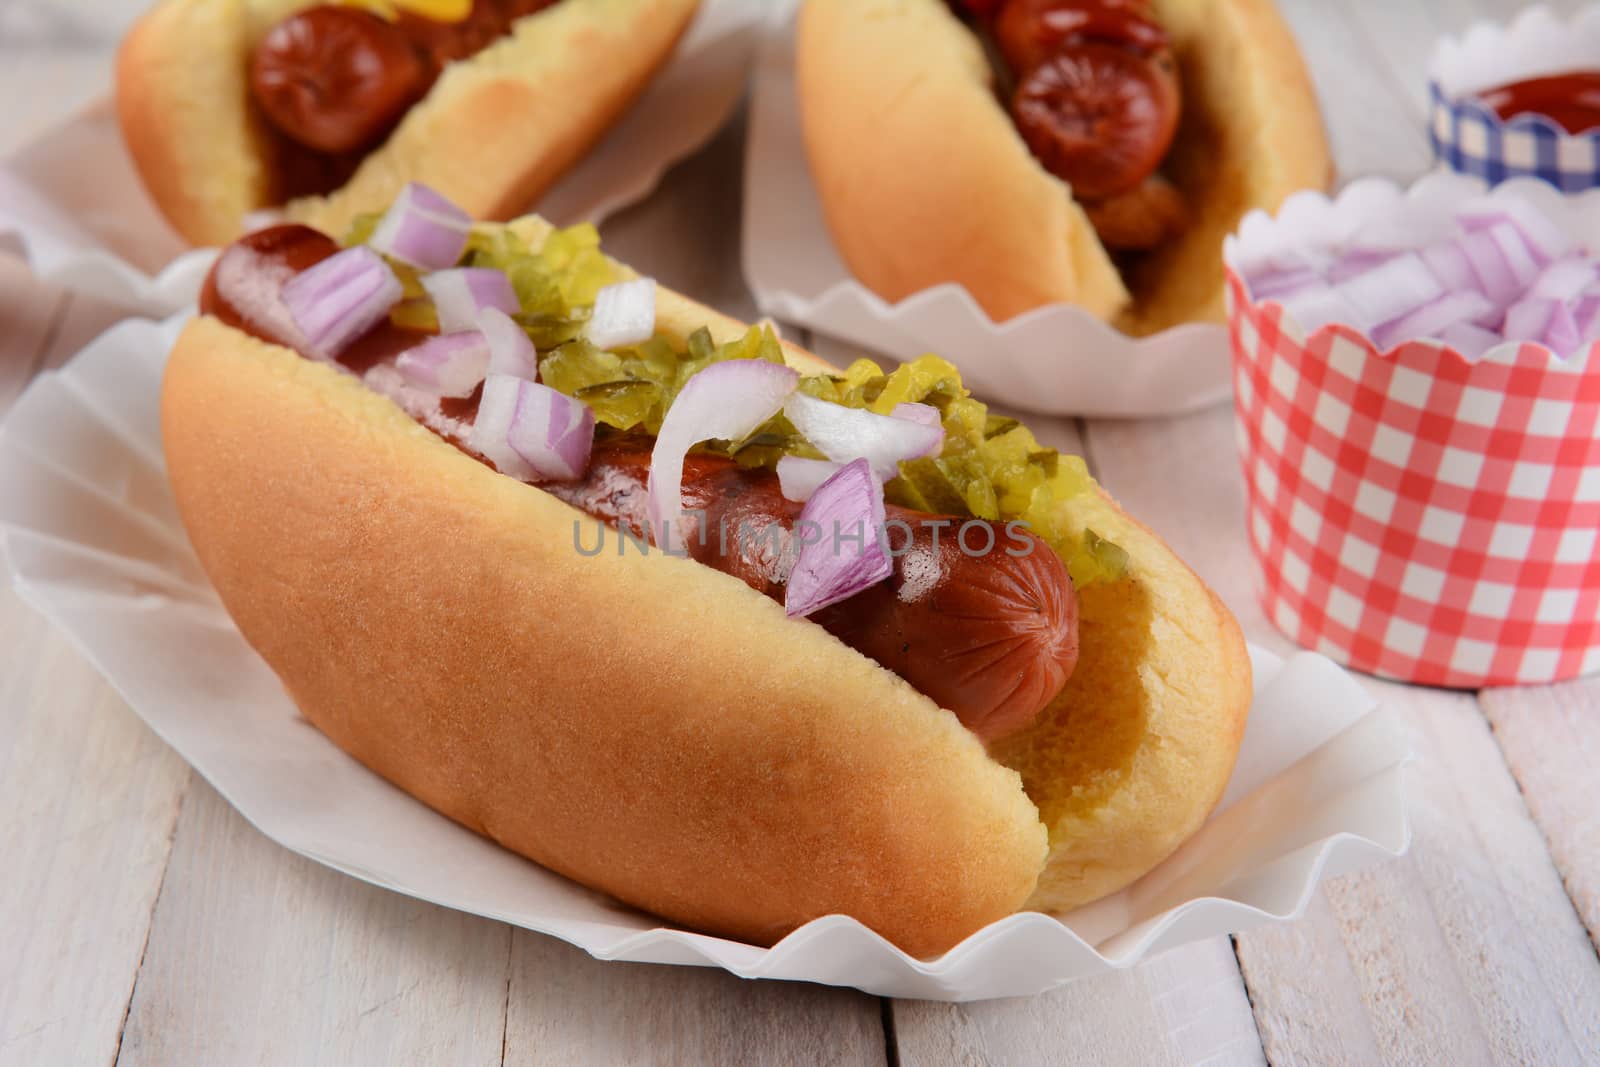 Closeup of a hot dog with relish and onions, in the background are two additional franks in buns and cups of condiments.